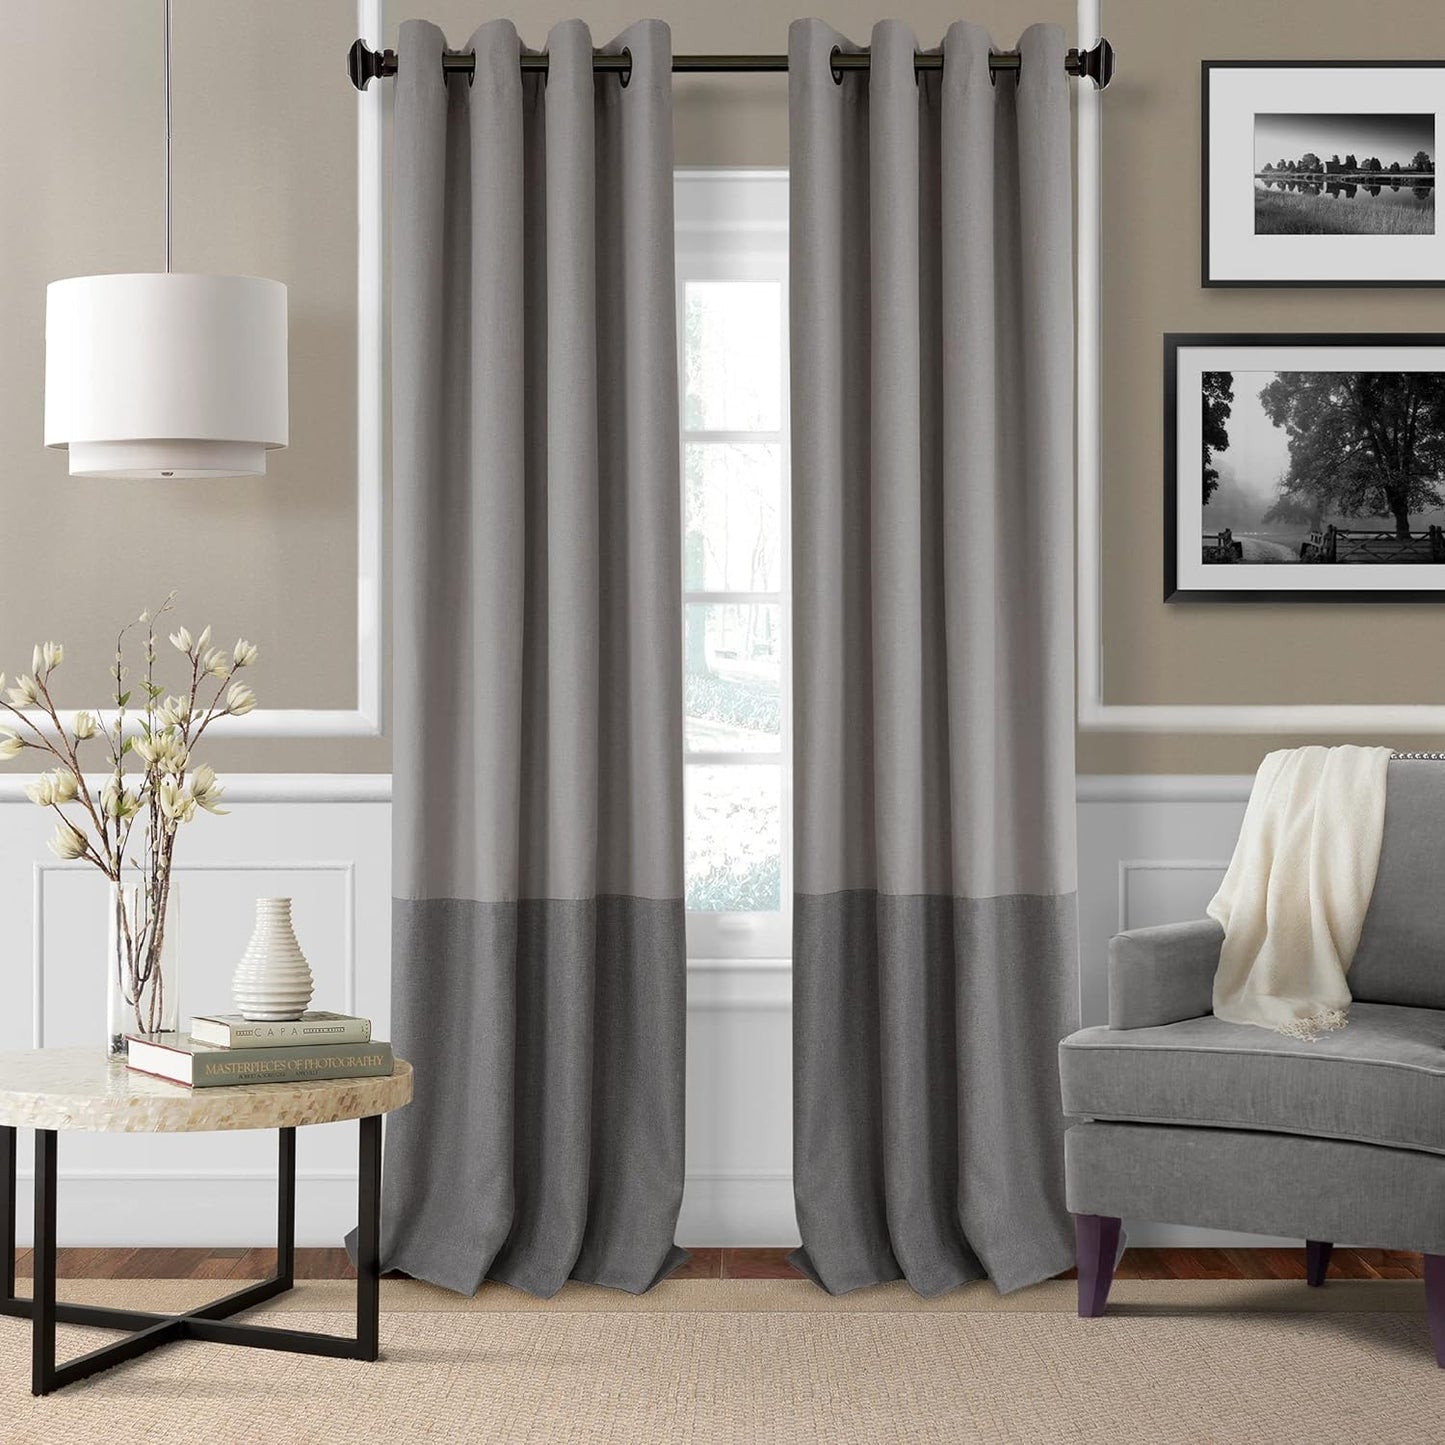 Elrene Home Fashions Braiden Color-Block Blackout Window Curtain, Single Panel, 52 in X 84 in (1 Panel), Linen  Elrene Home Fashions Grey 52" X 95" (1 Panel) 